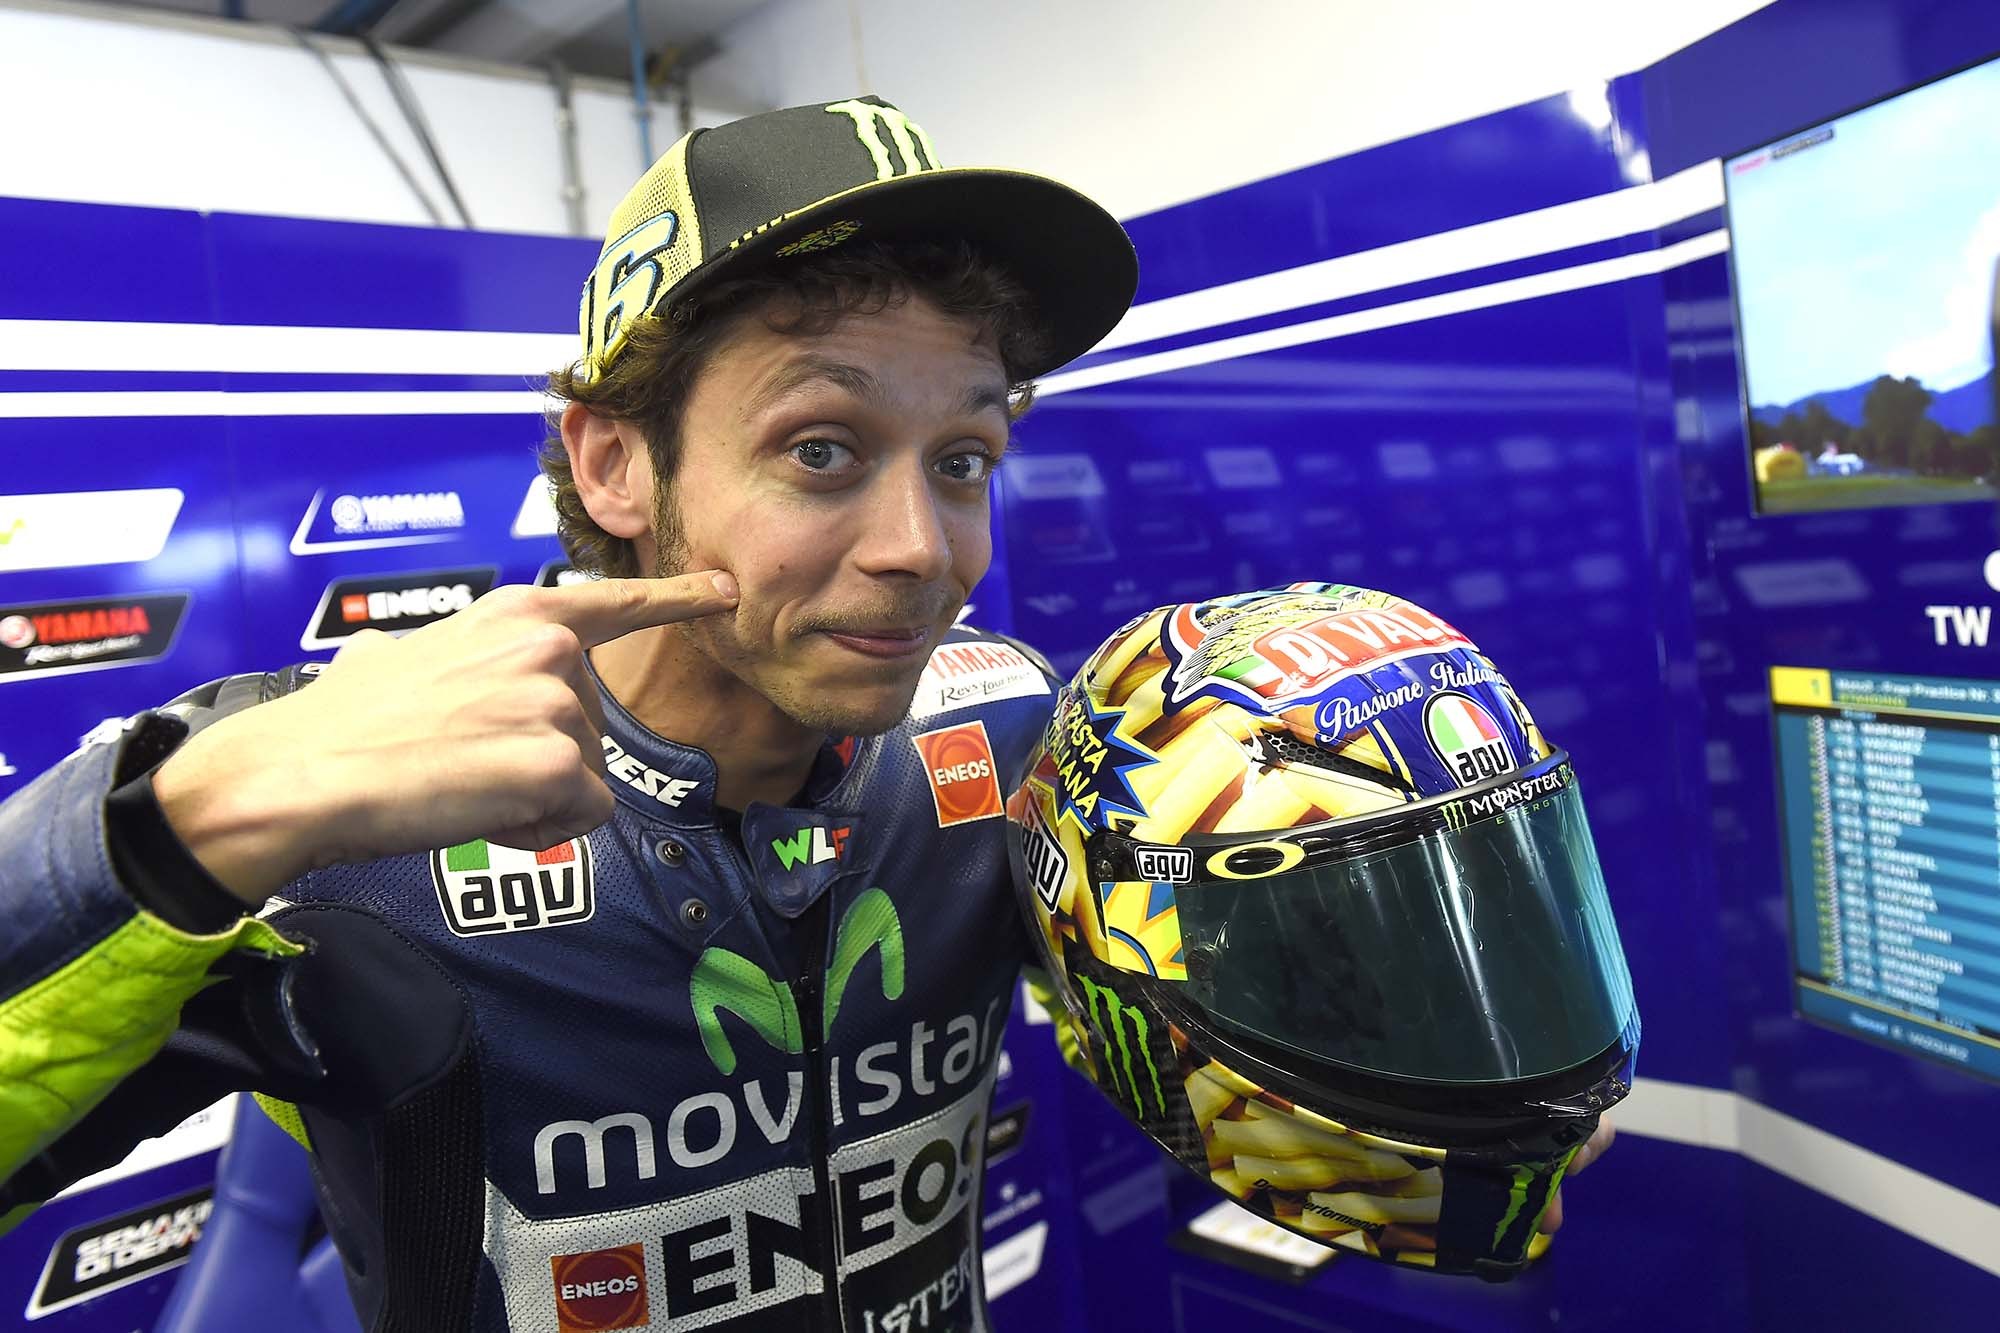 How Tall Is Valentino Rossi